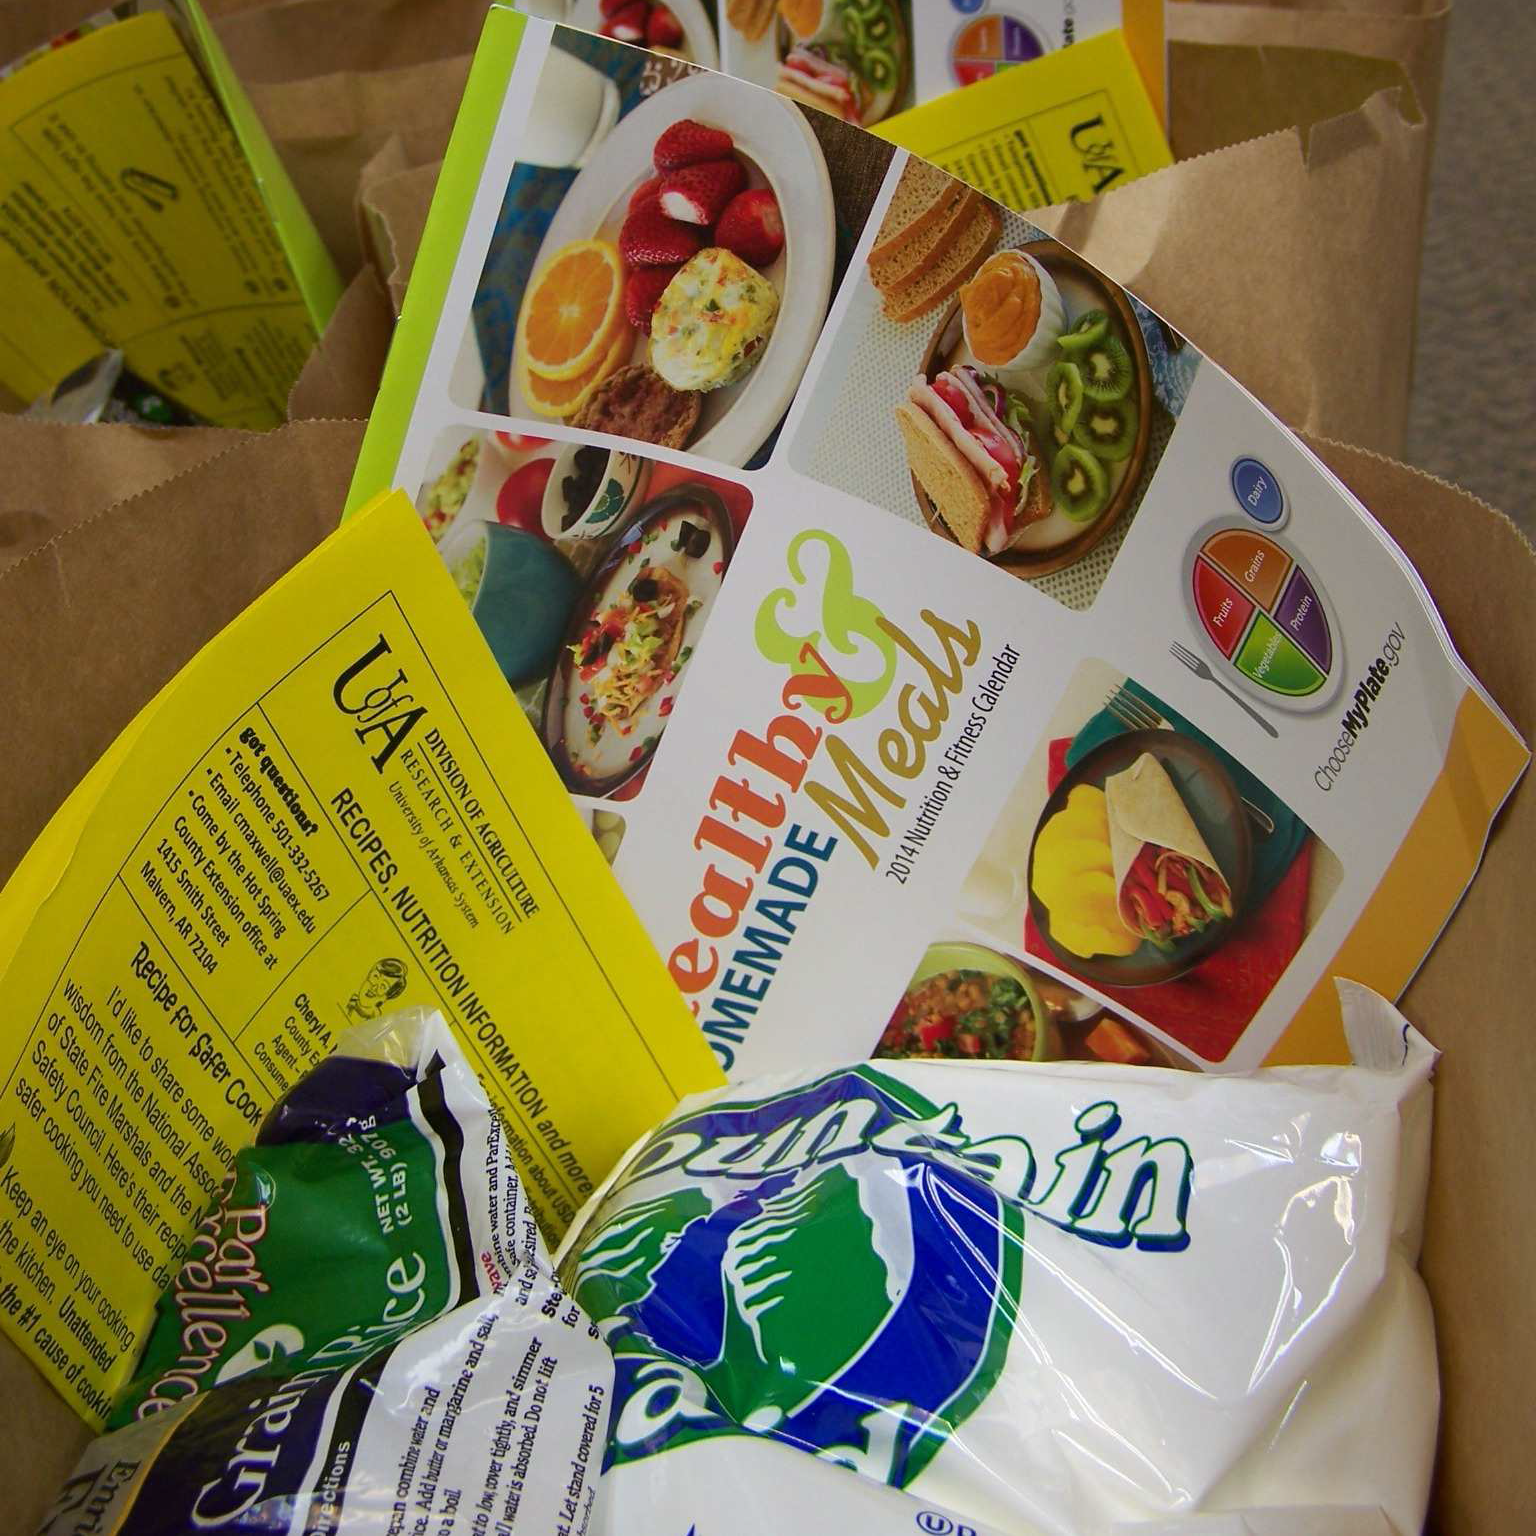 Paper grocery bag full of commodities such as rice and dried beans. Also includes a monthly calendar of recipes and a yellow newsletter telling how to use the commodities.